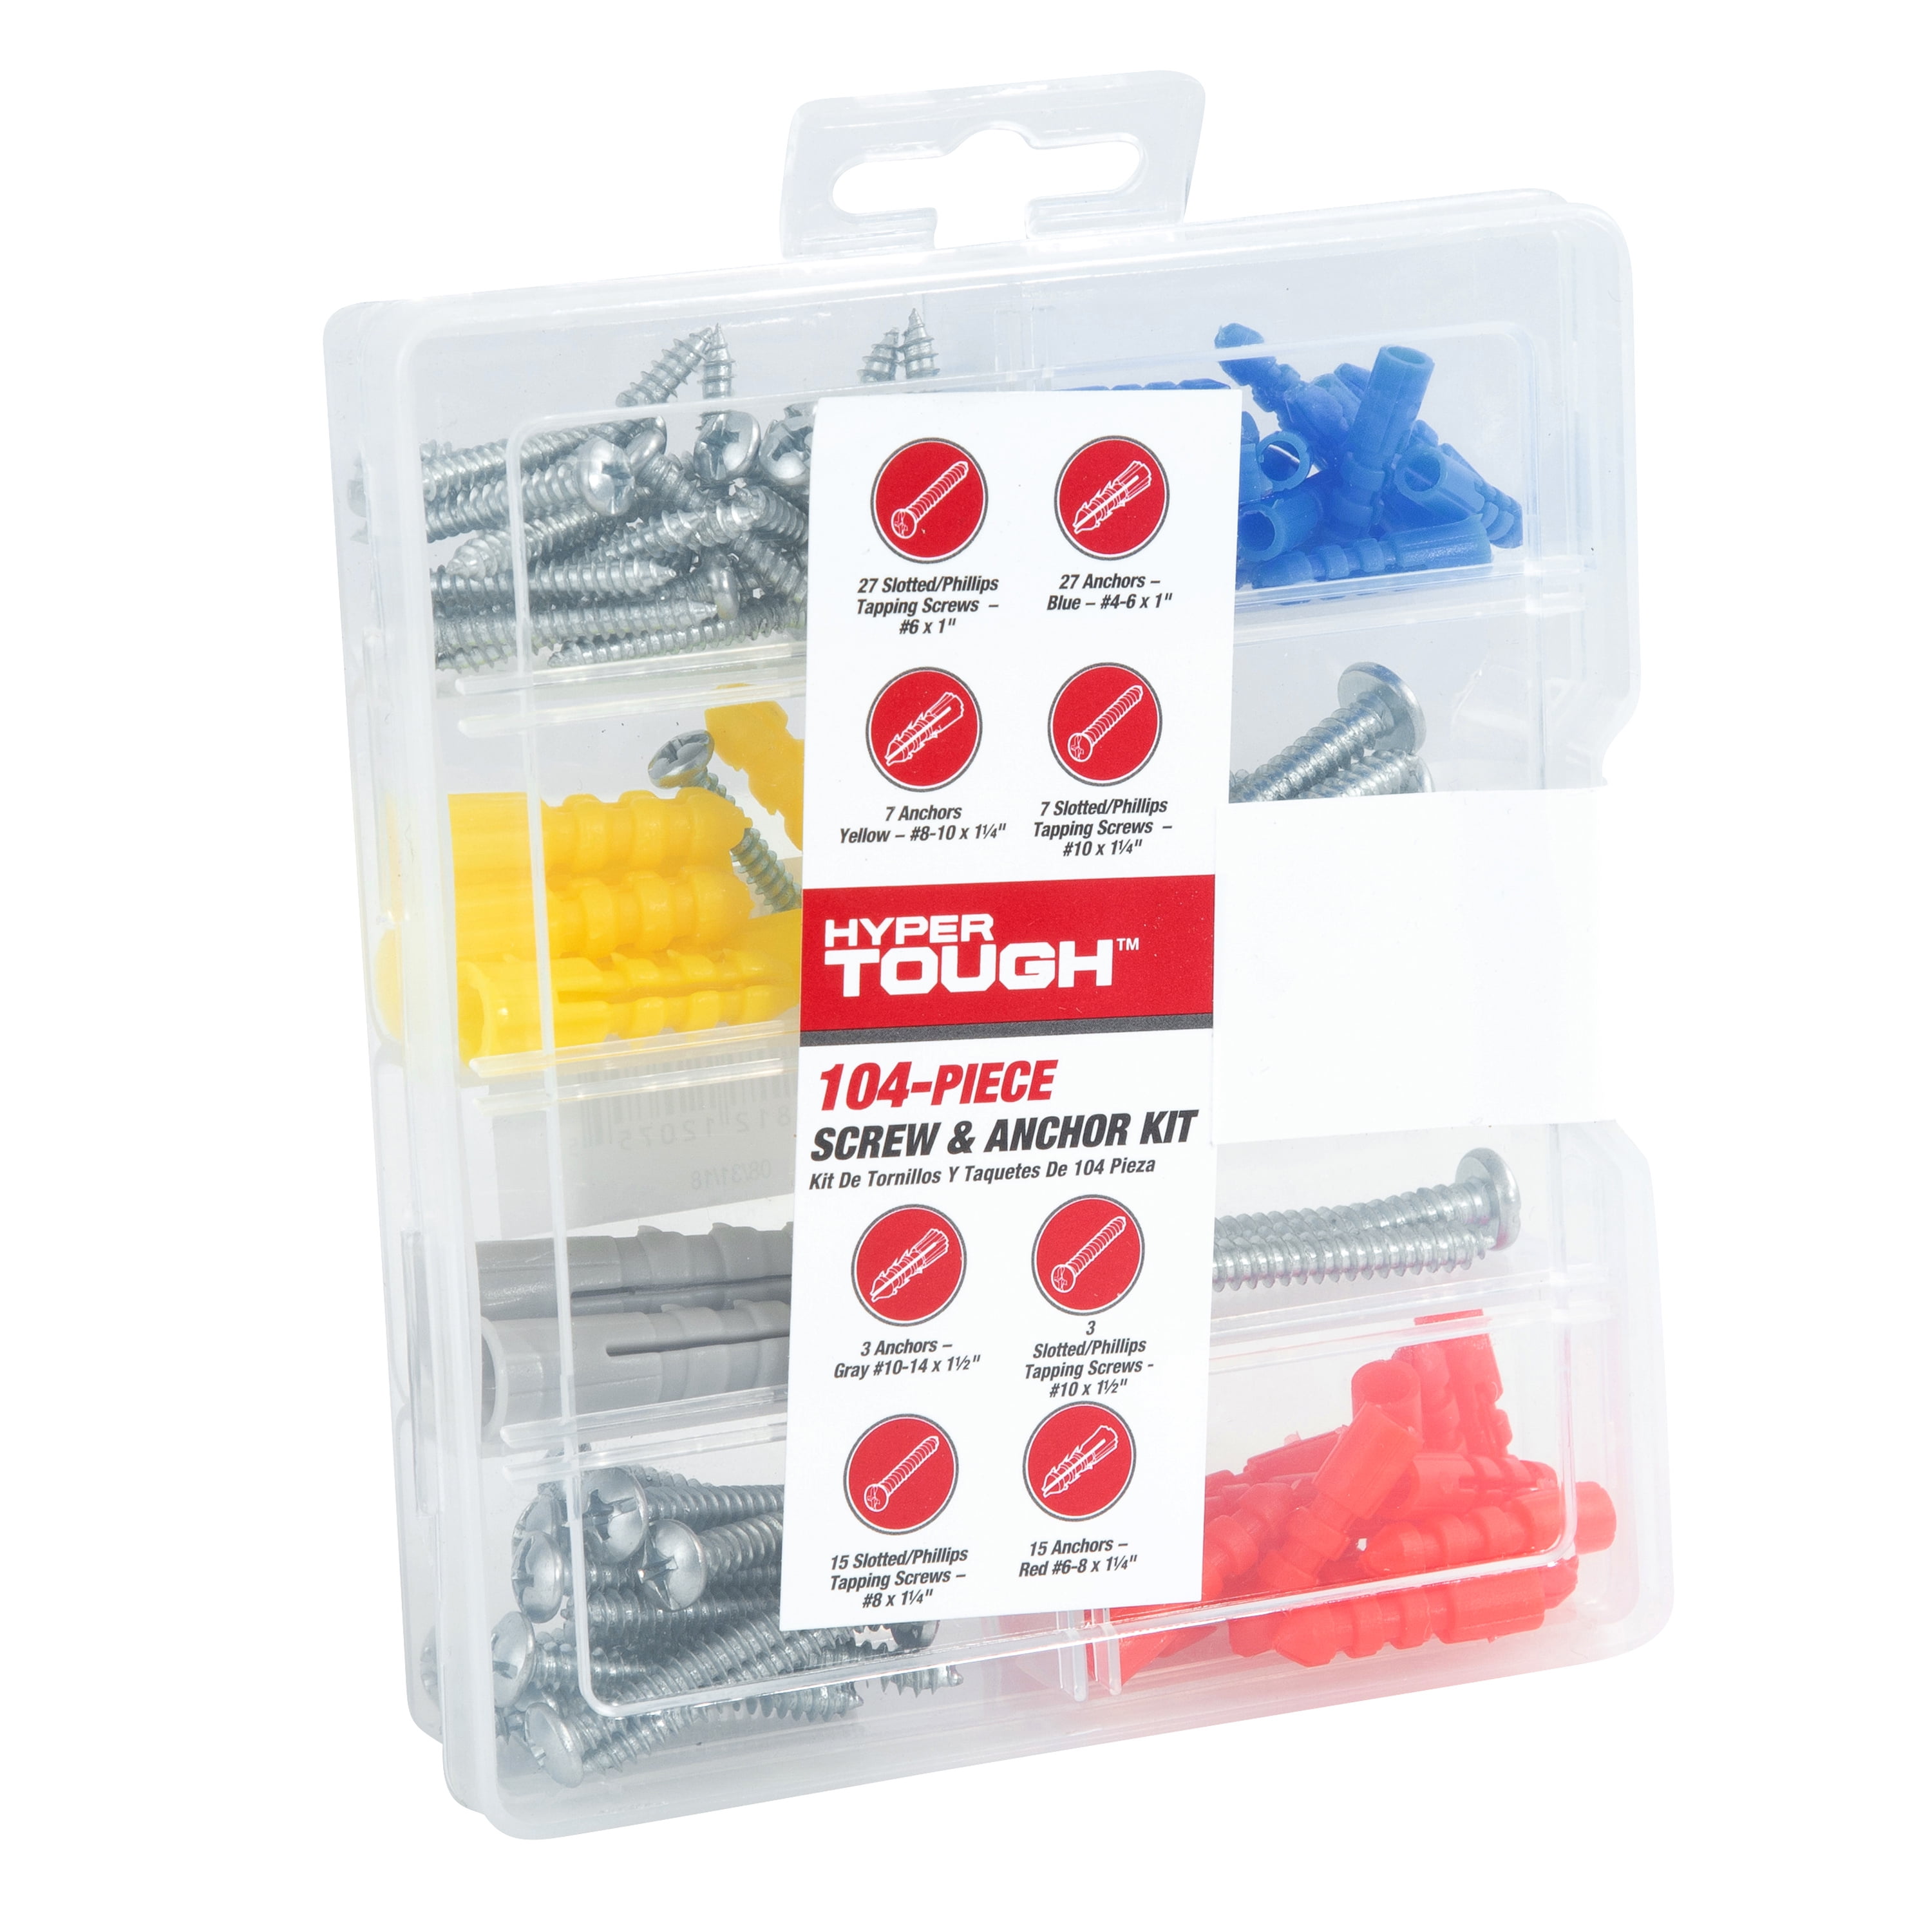 Hyper Tough 104-Piece Screw and Plastic Drywall Anchor Assortment with Case, 3308